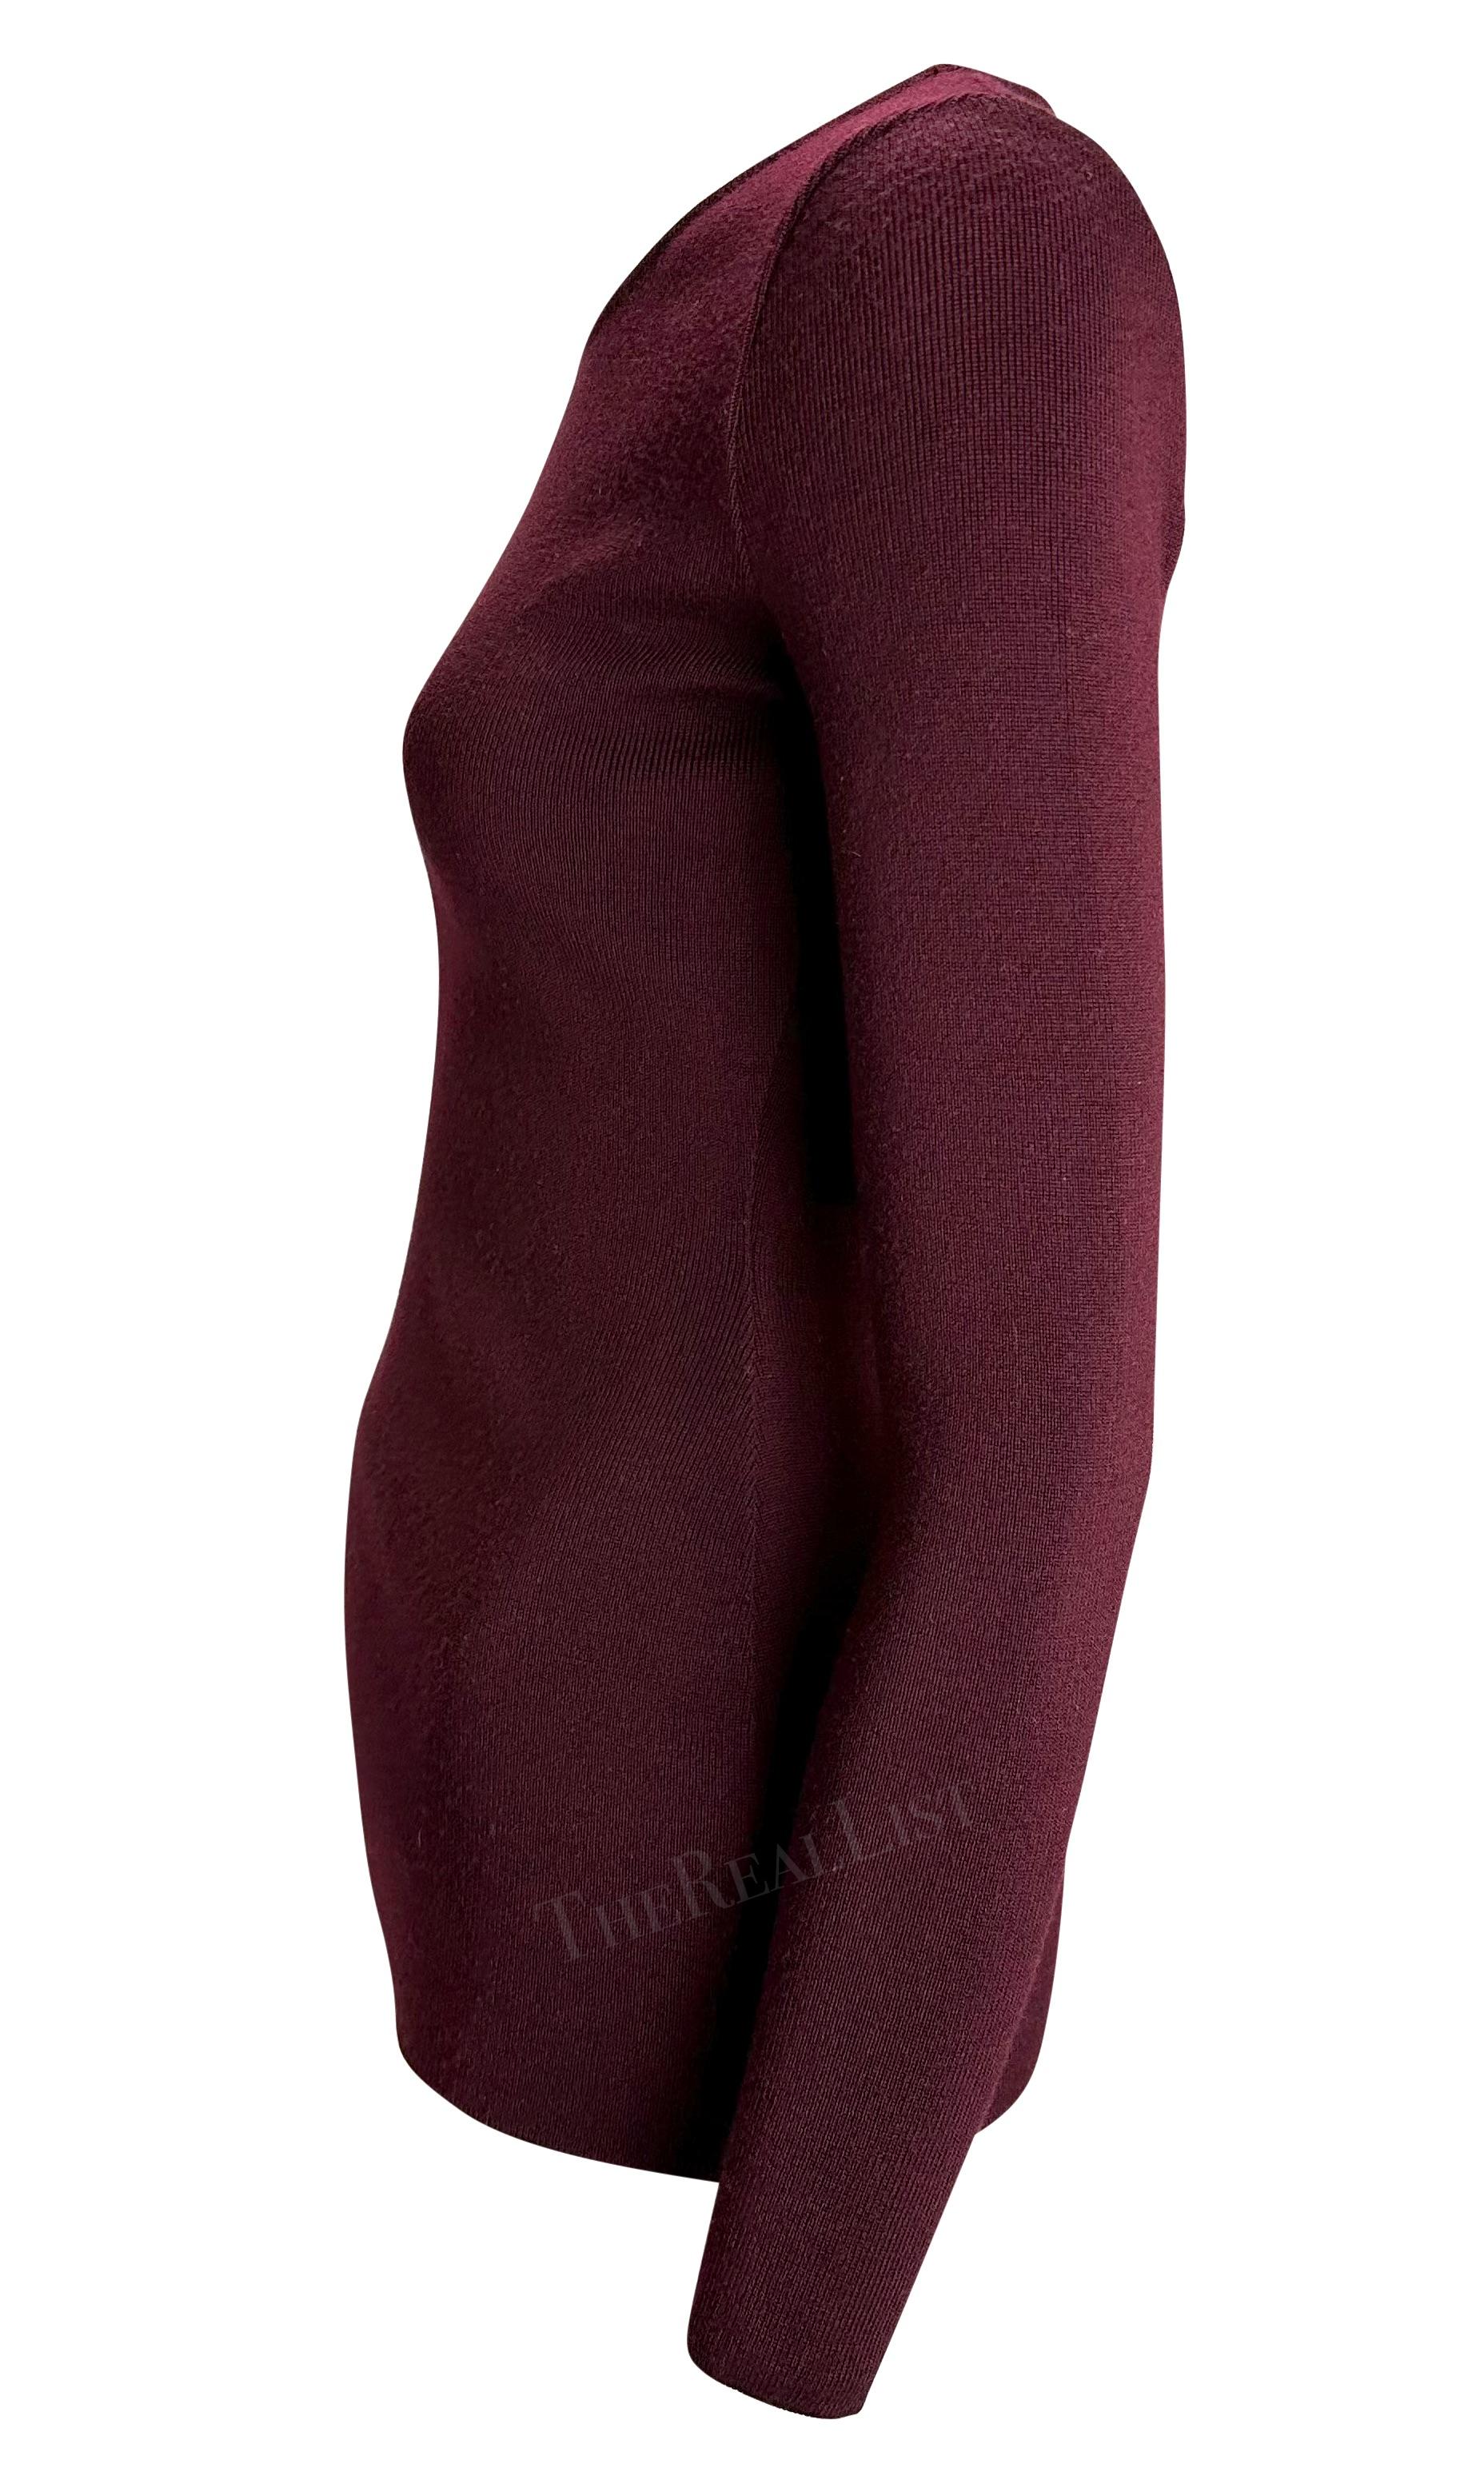 F/W 1996 Gucci by Tom Ford Burgundy Stretch Knit Wool Sweater Top Excellent état - En vente à West Hollywood, CA